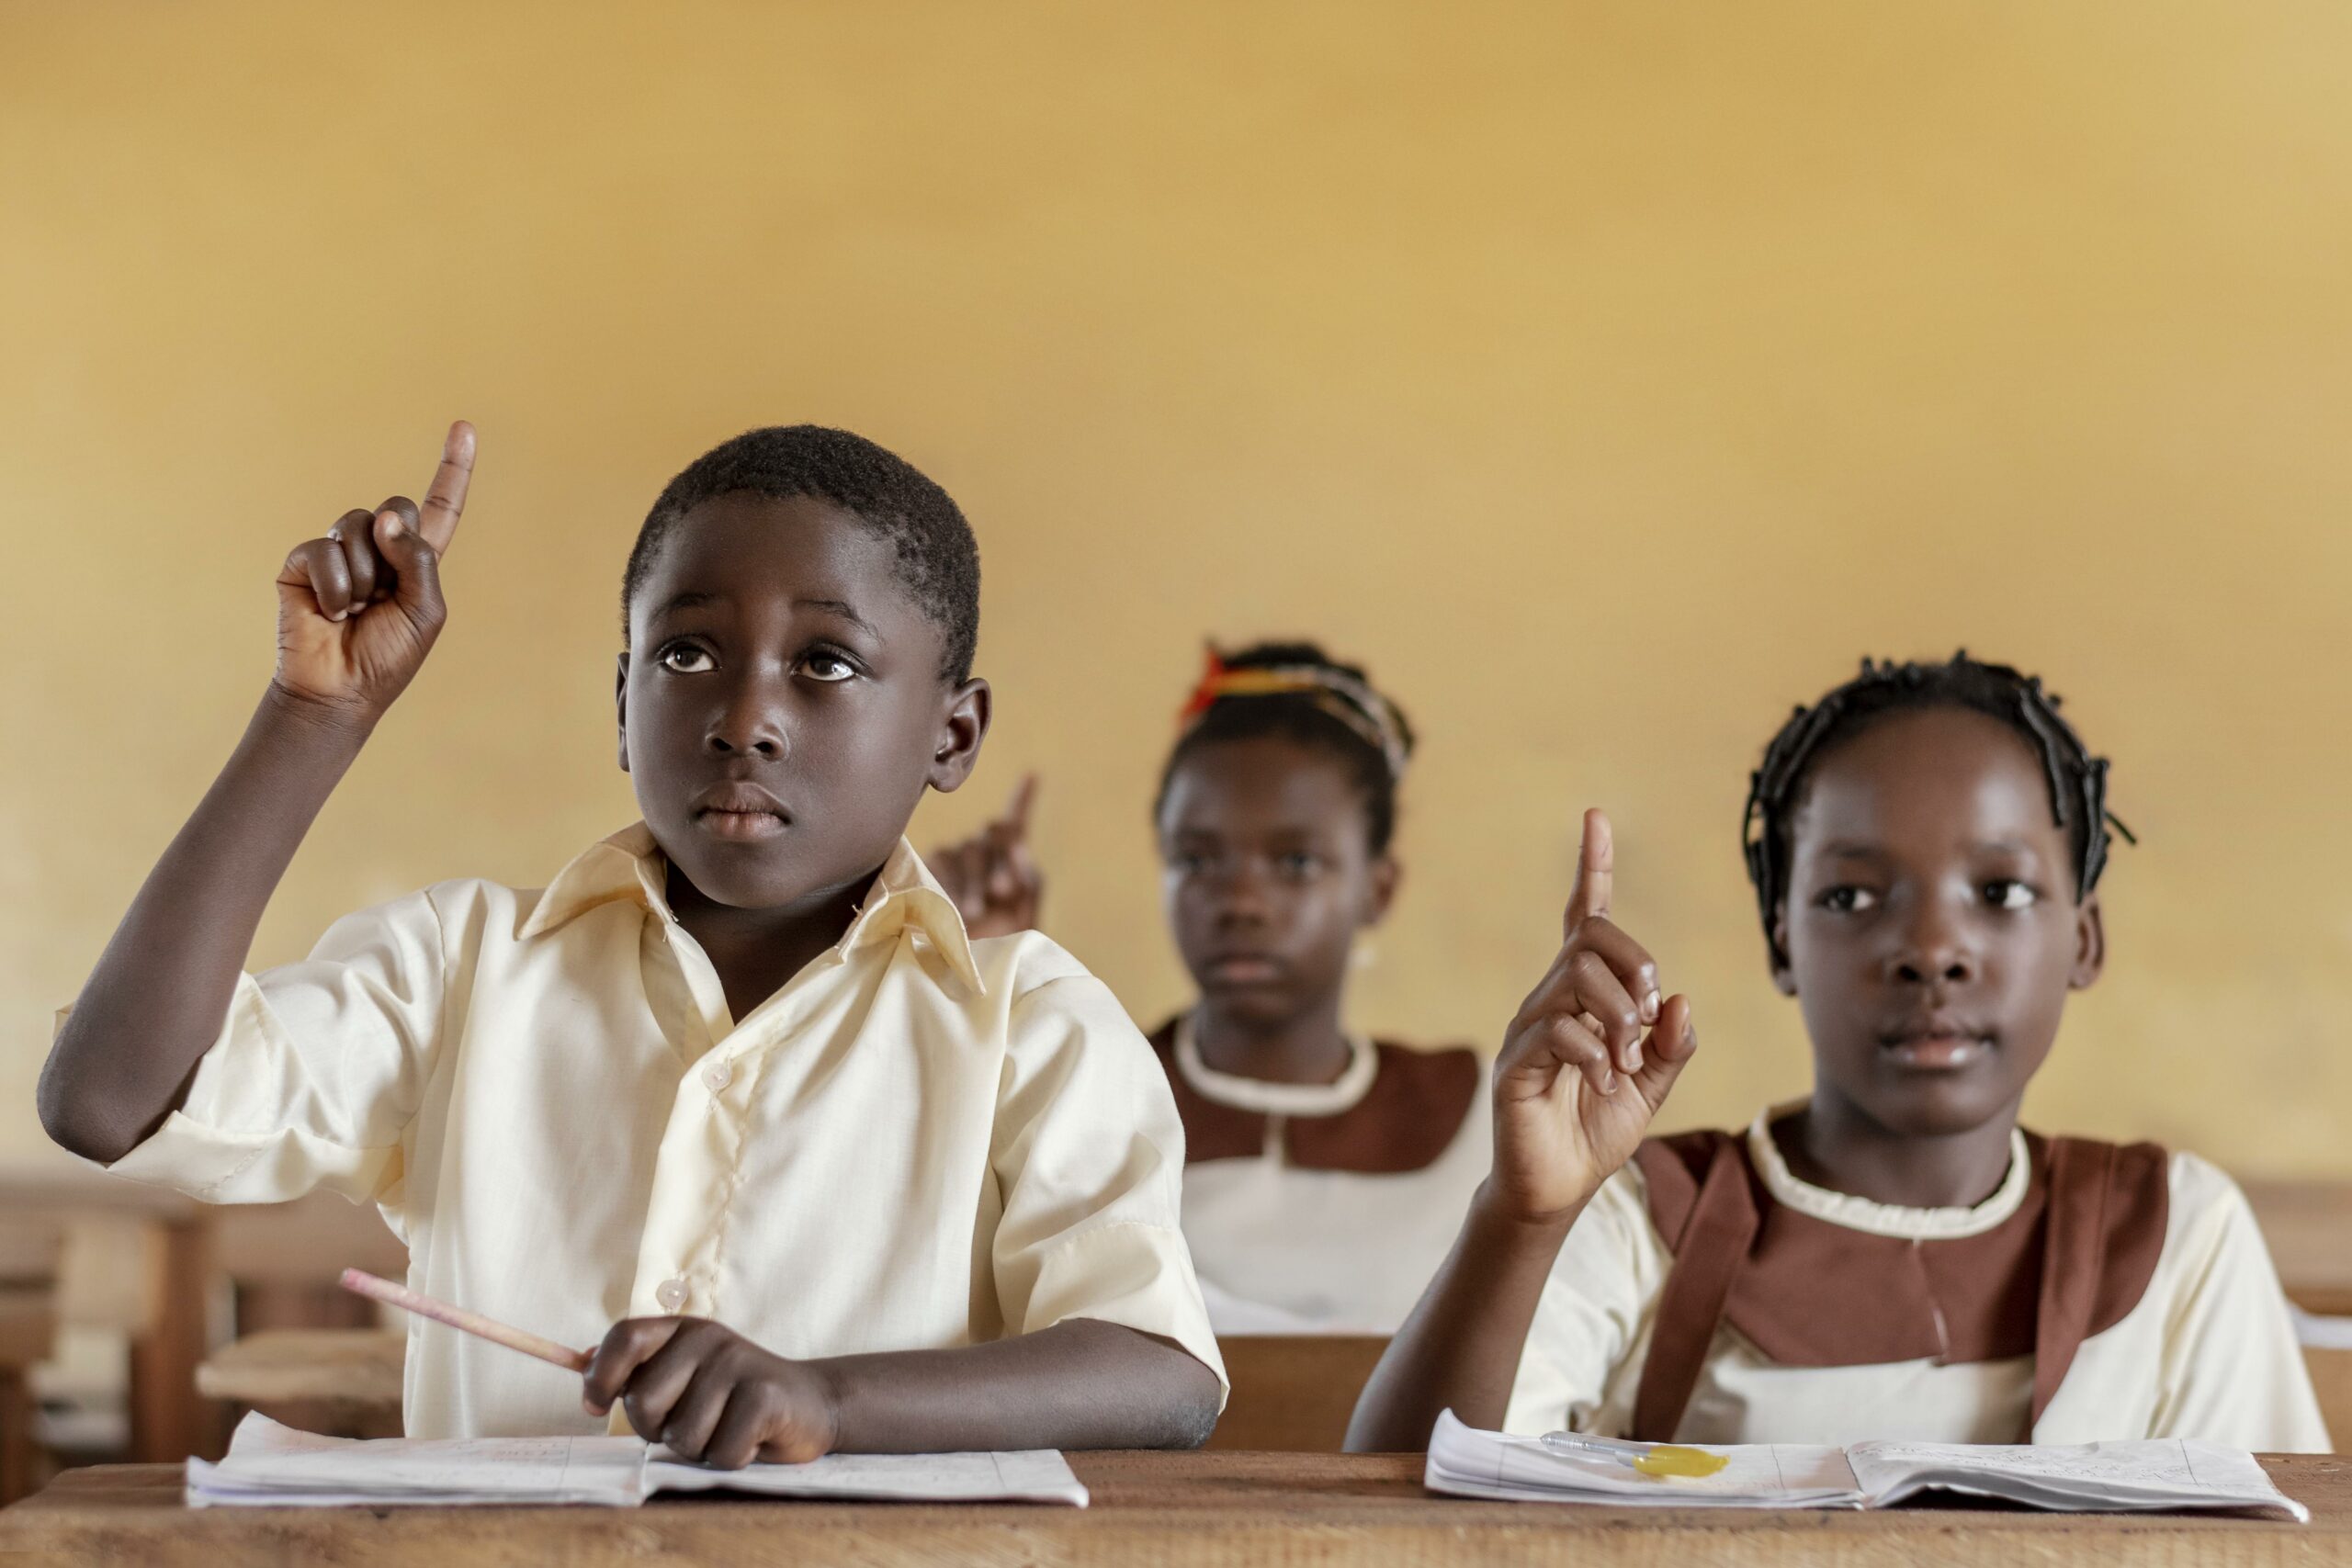 //dh-foundation.org/wp-content/uploads/2022/12/group-african-kids-classroom-scaled.jpg